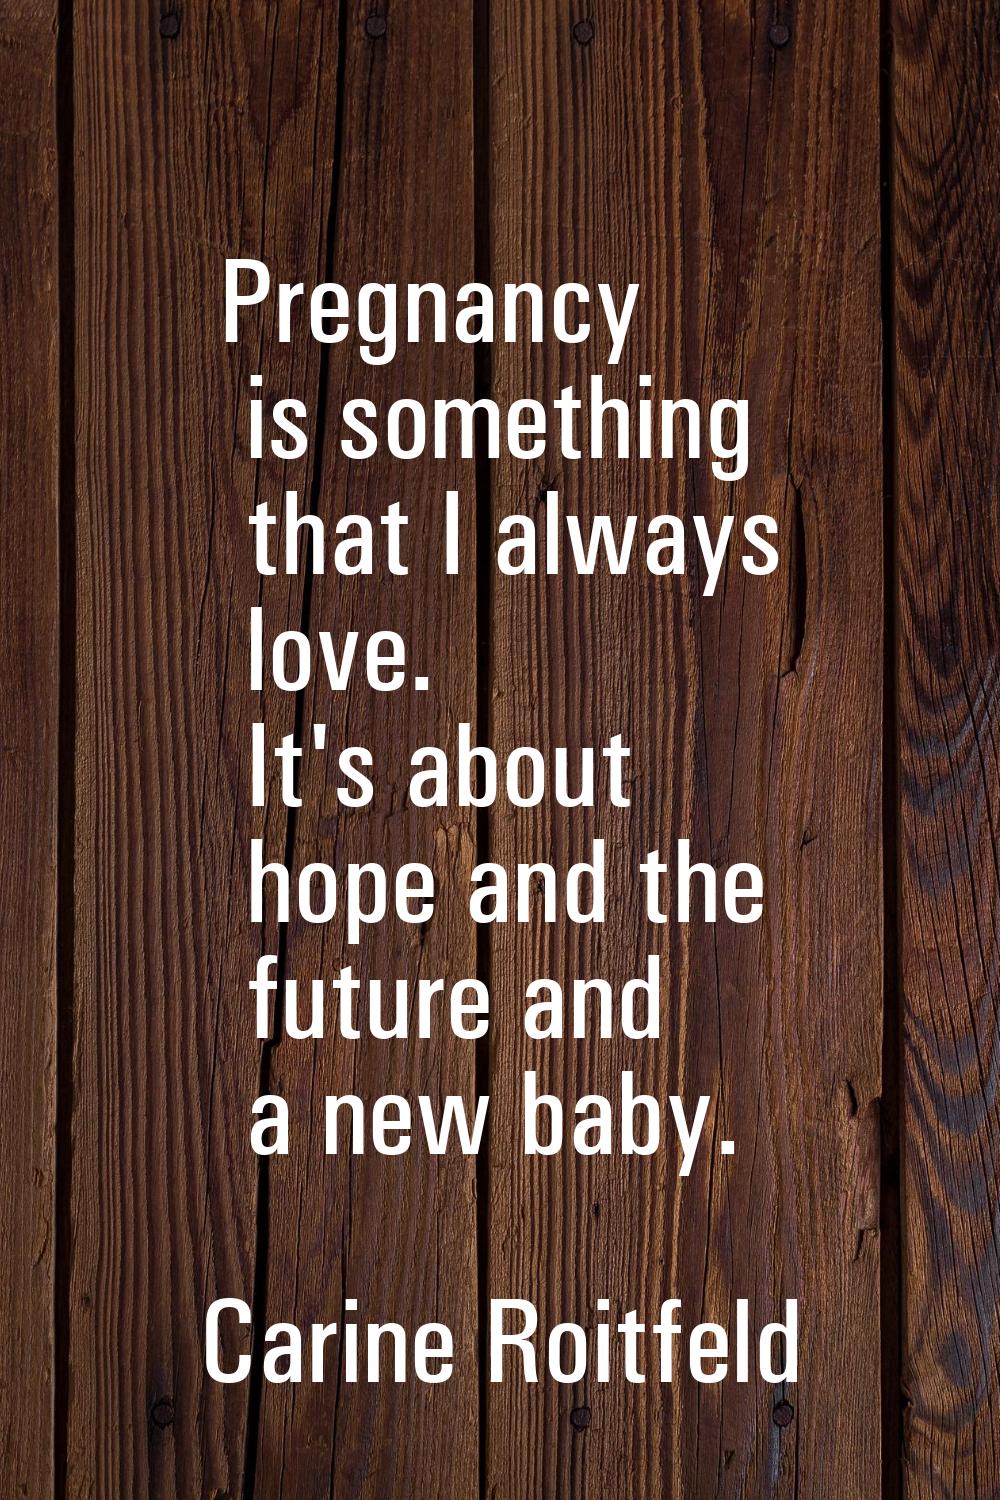 Pregnancy is something that I always love. It's about hope and the future and a new baby.